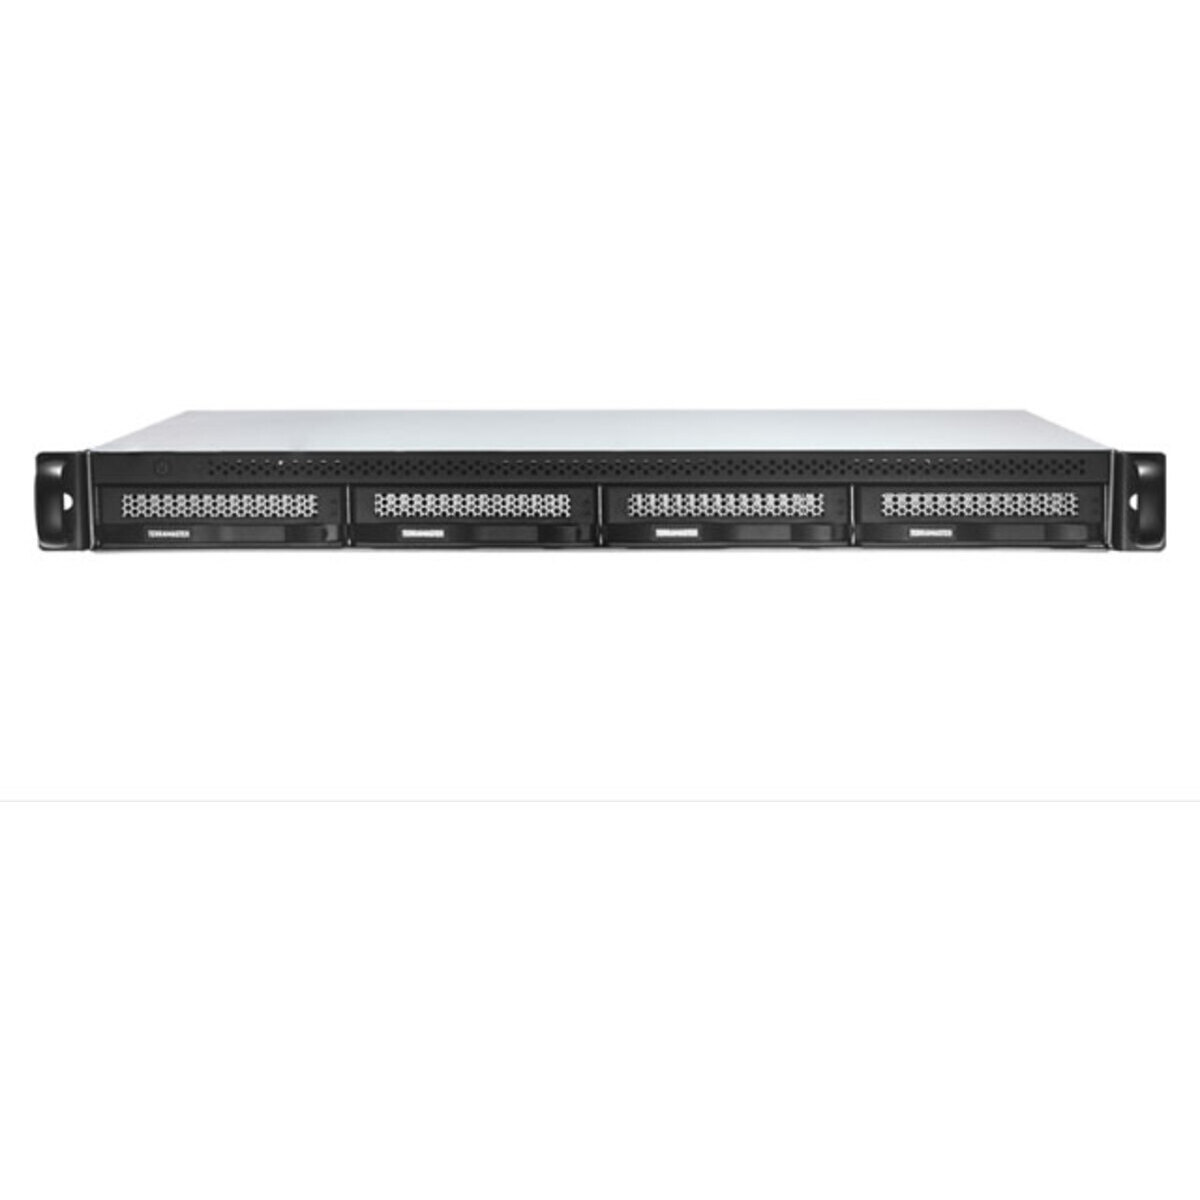 TerraMaster U4-423 2tb 4-Bay RackMount Multimedia / Power User / Business NAS - Network Attached Storage Device 2x1tb Crucial MX500 CT1000MX500SSD1 2.5 560/510MB/s SATA 6Gb/s SSD CONSUMER Class Drives Installed - Burn-In Tested - FREE RAM UPGRADE U4-423